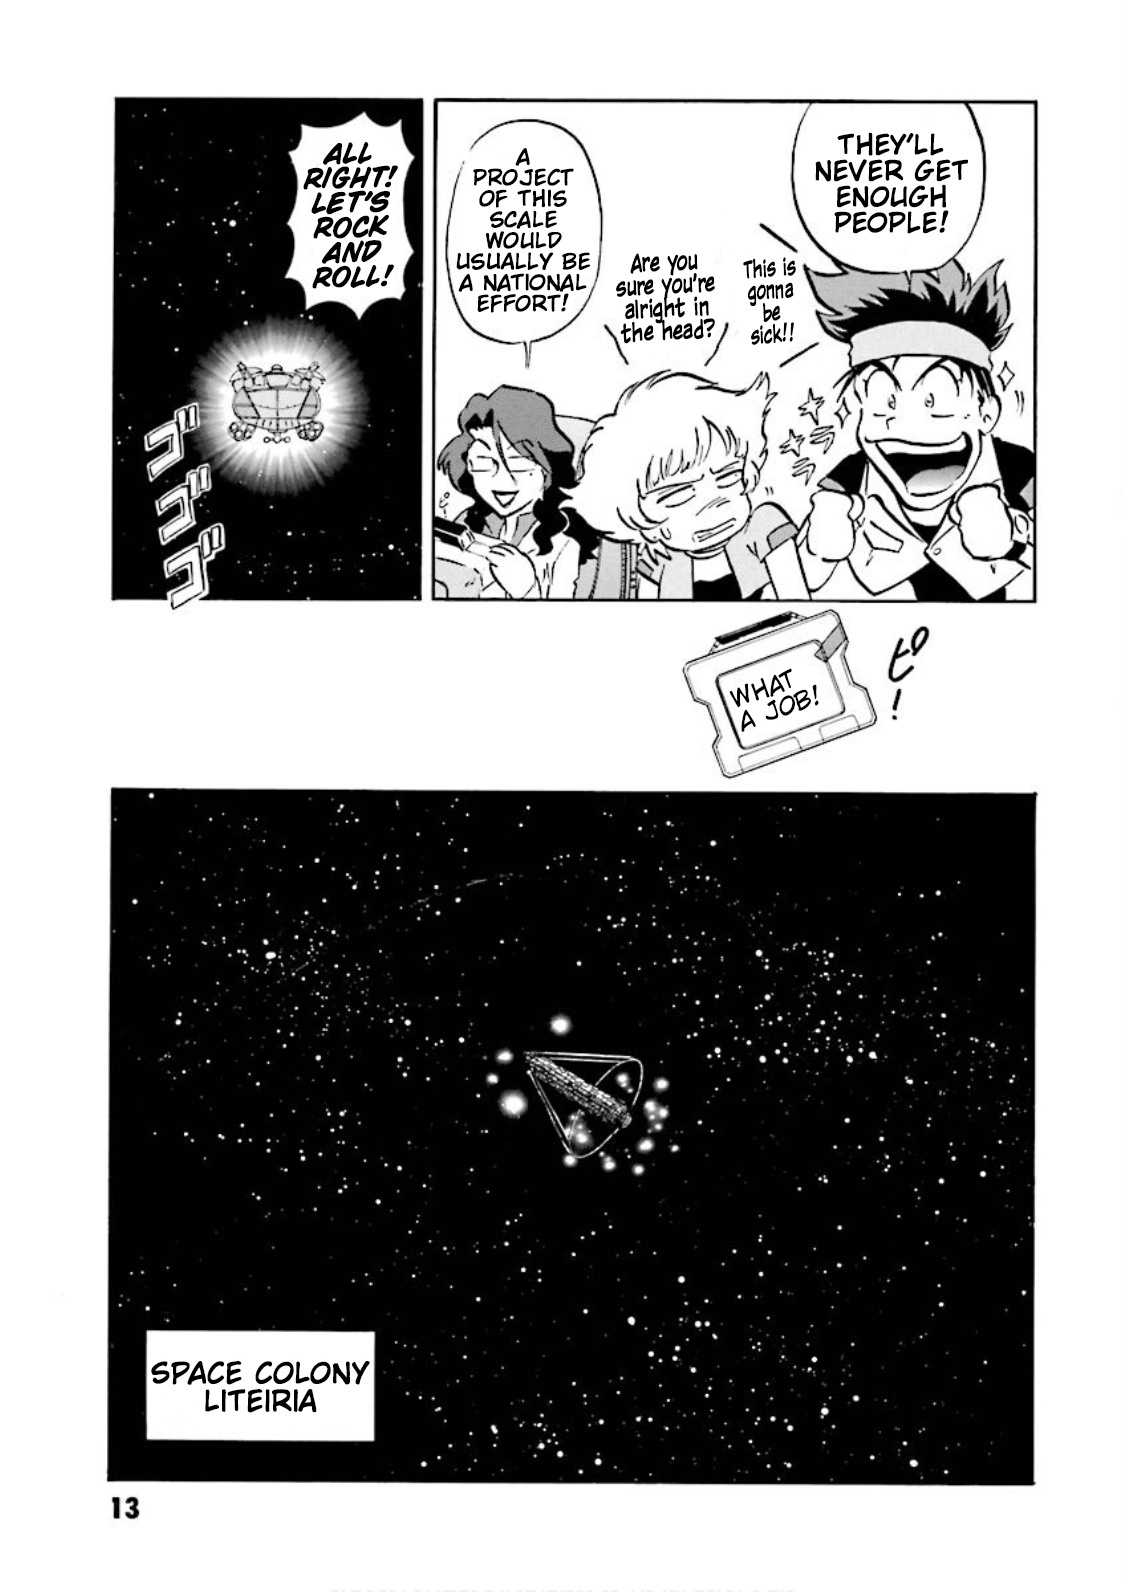 Mobile Suit Gundam Seed Astray Re:master Edition Chapter 6 #6